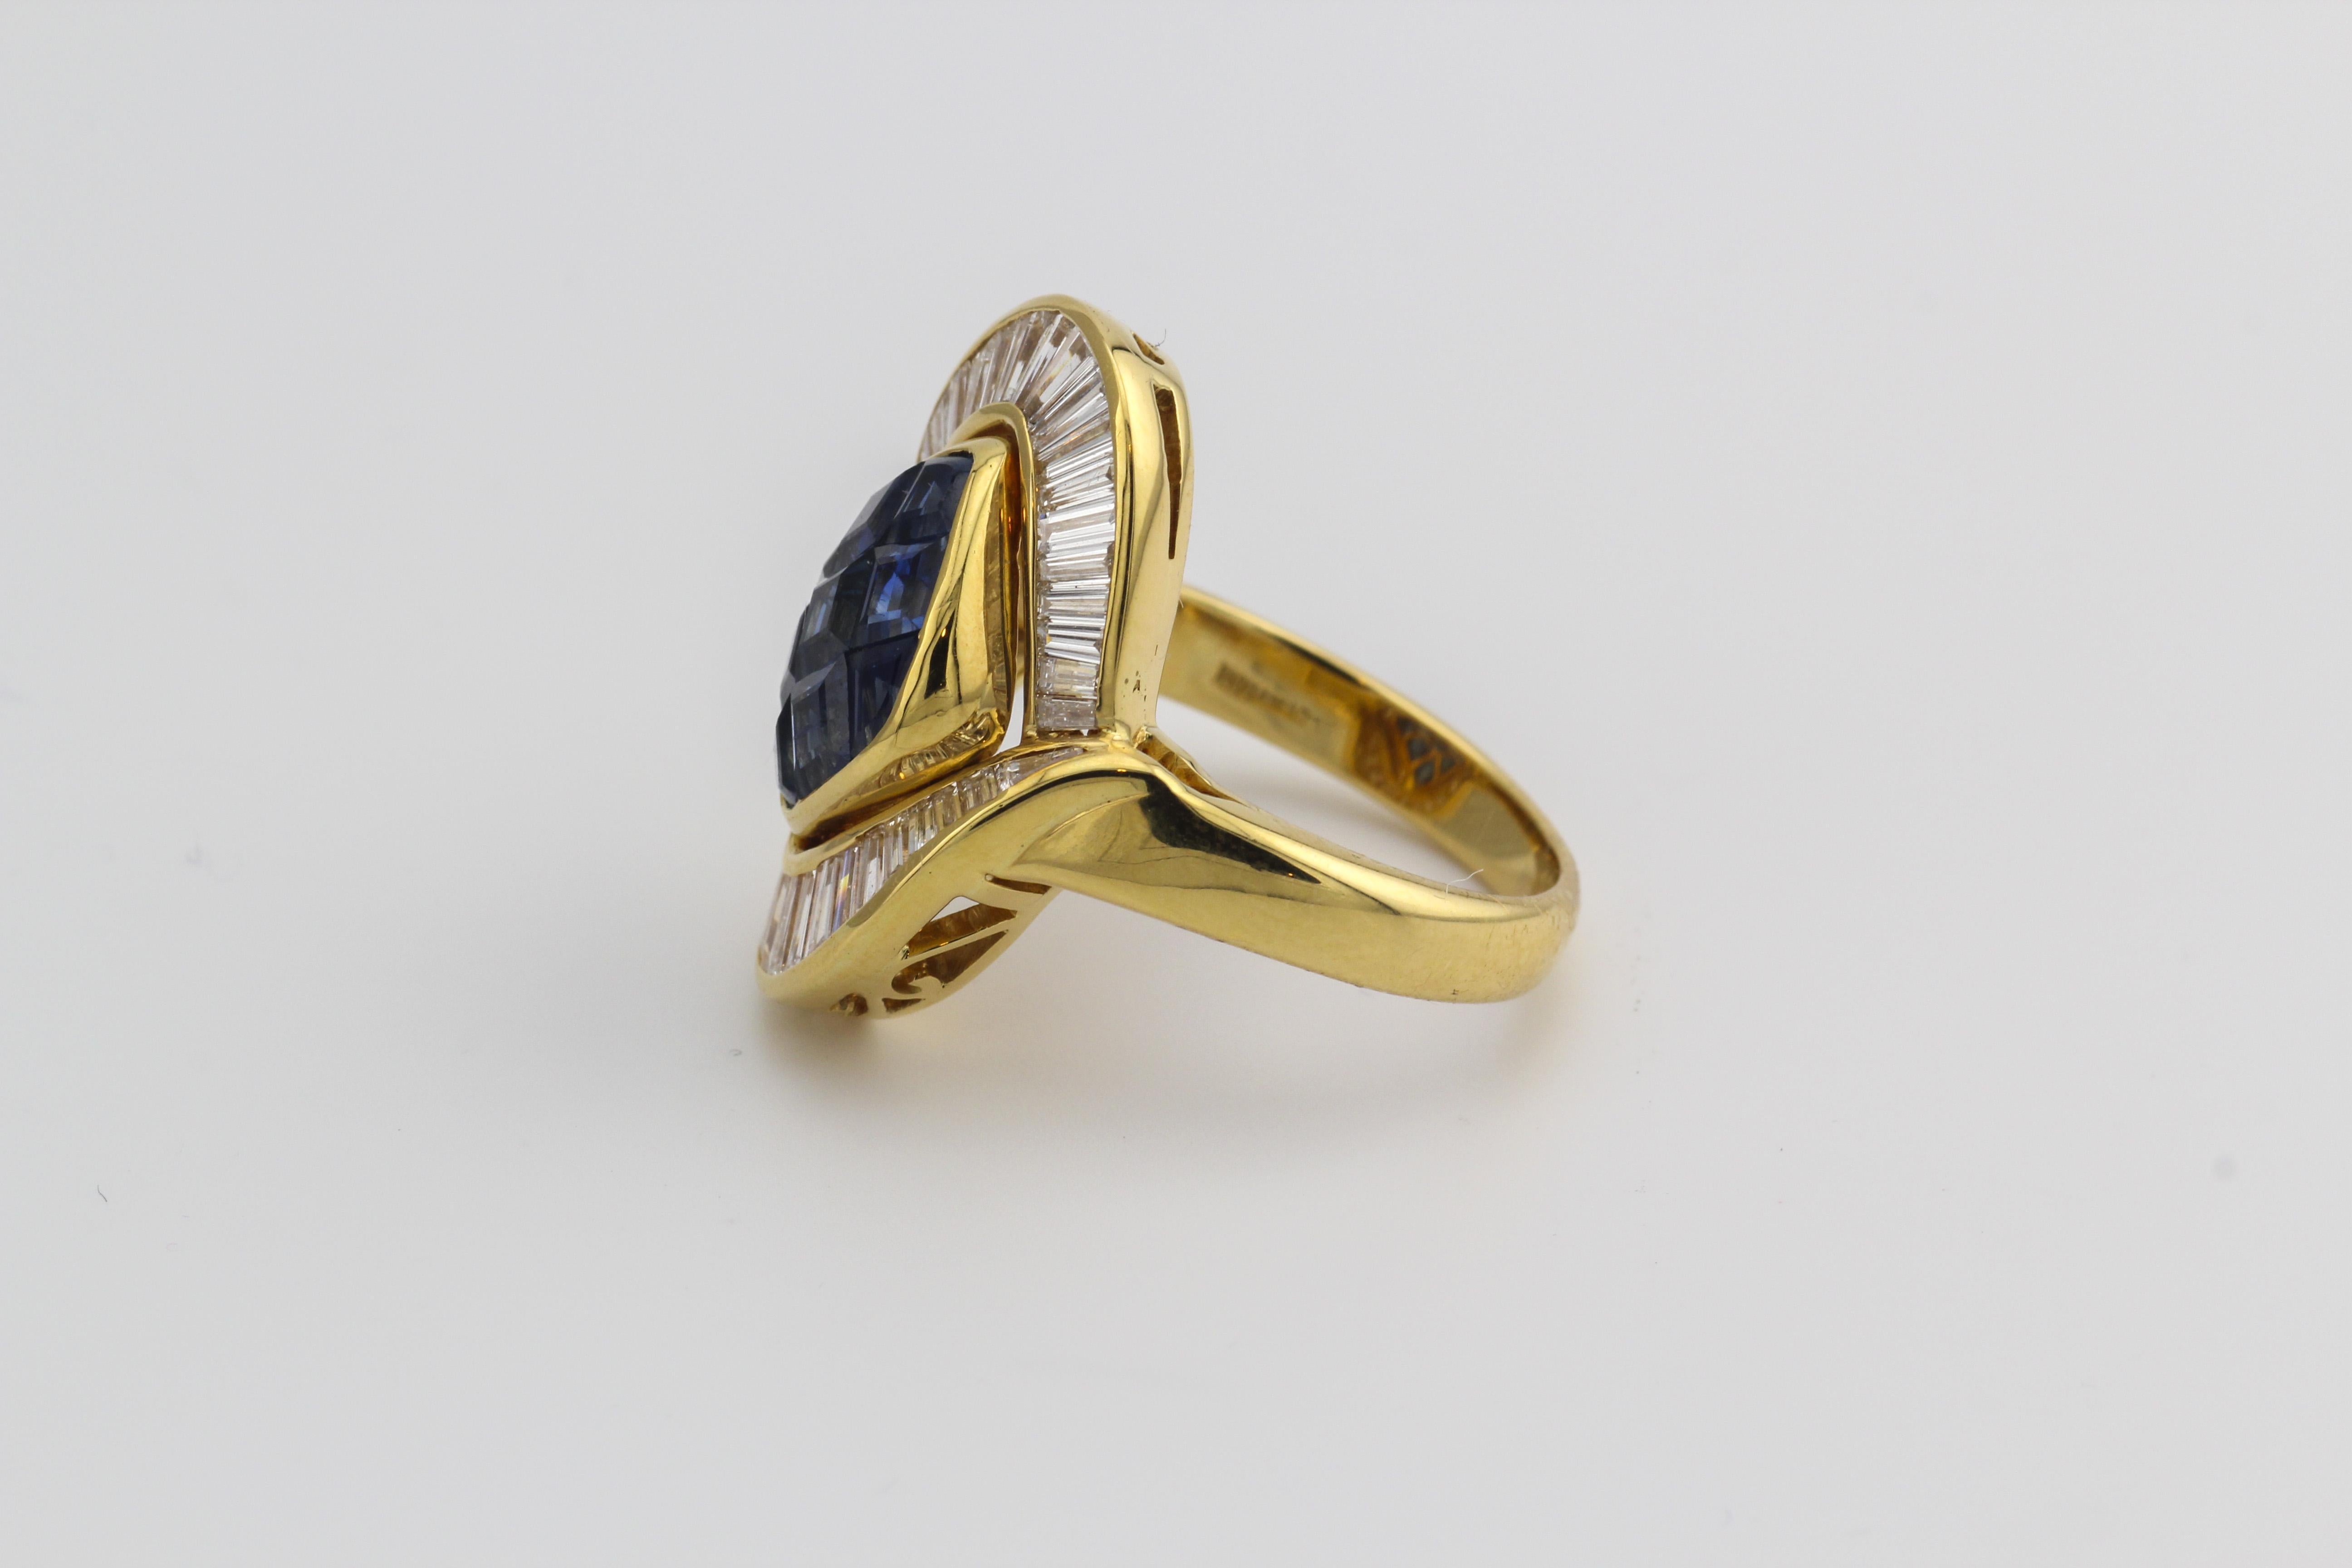 Mouawad Mystery Set Sapphire Diamond 18k Yellow Gold Ring Size 6.75 In Good Condition For Sale In Bellmore, NY